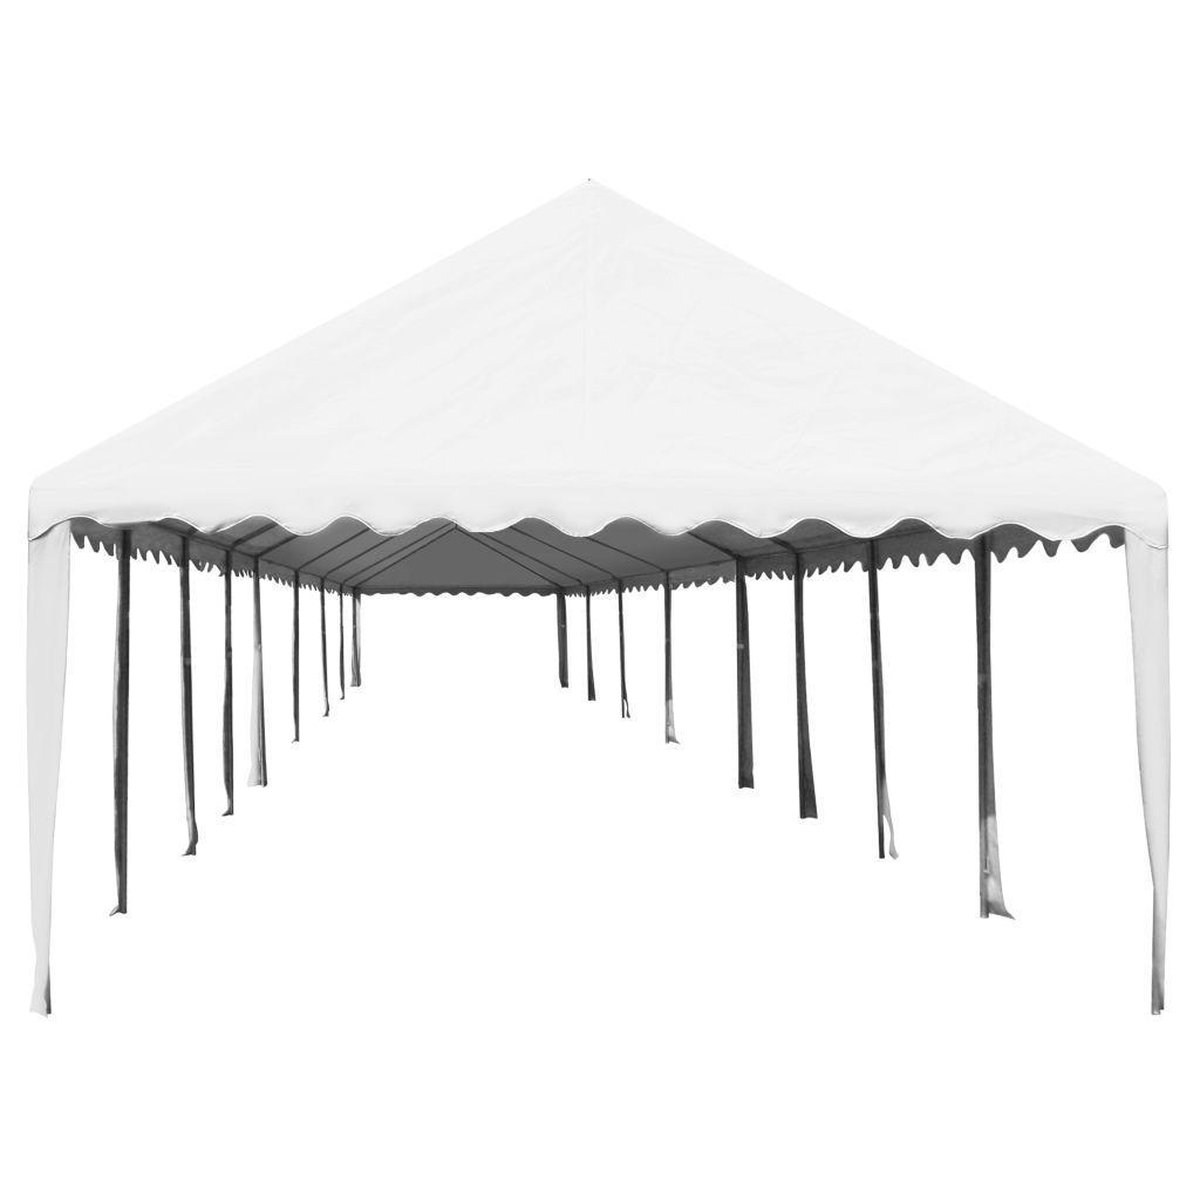 Grote Partytent Tuin 6x16MTR Wit / Party Tent / Tuin Tent / Tuin feest tent  -... | bol.com